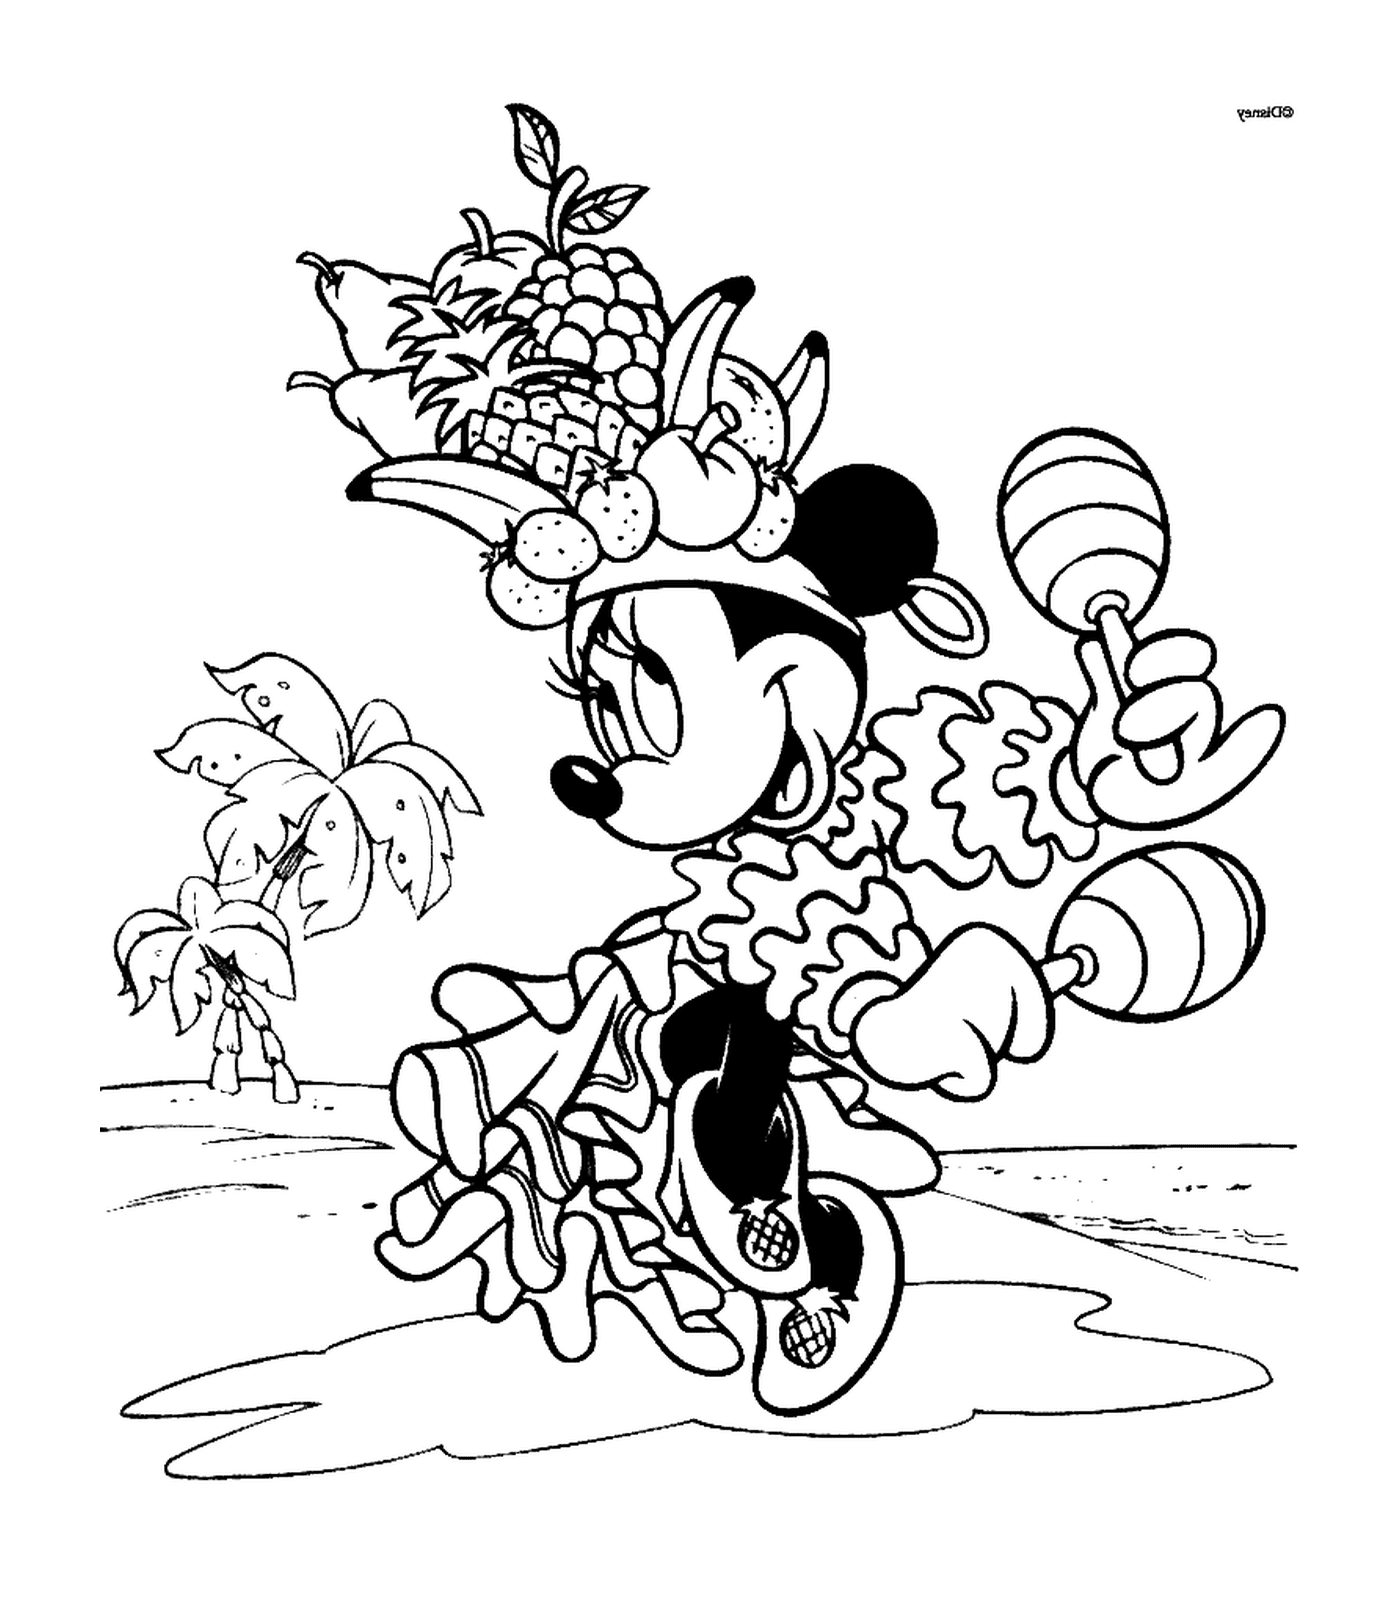  Minnie as a dancer of the islands 